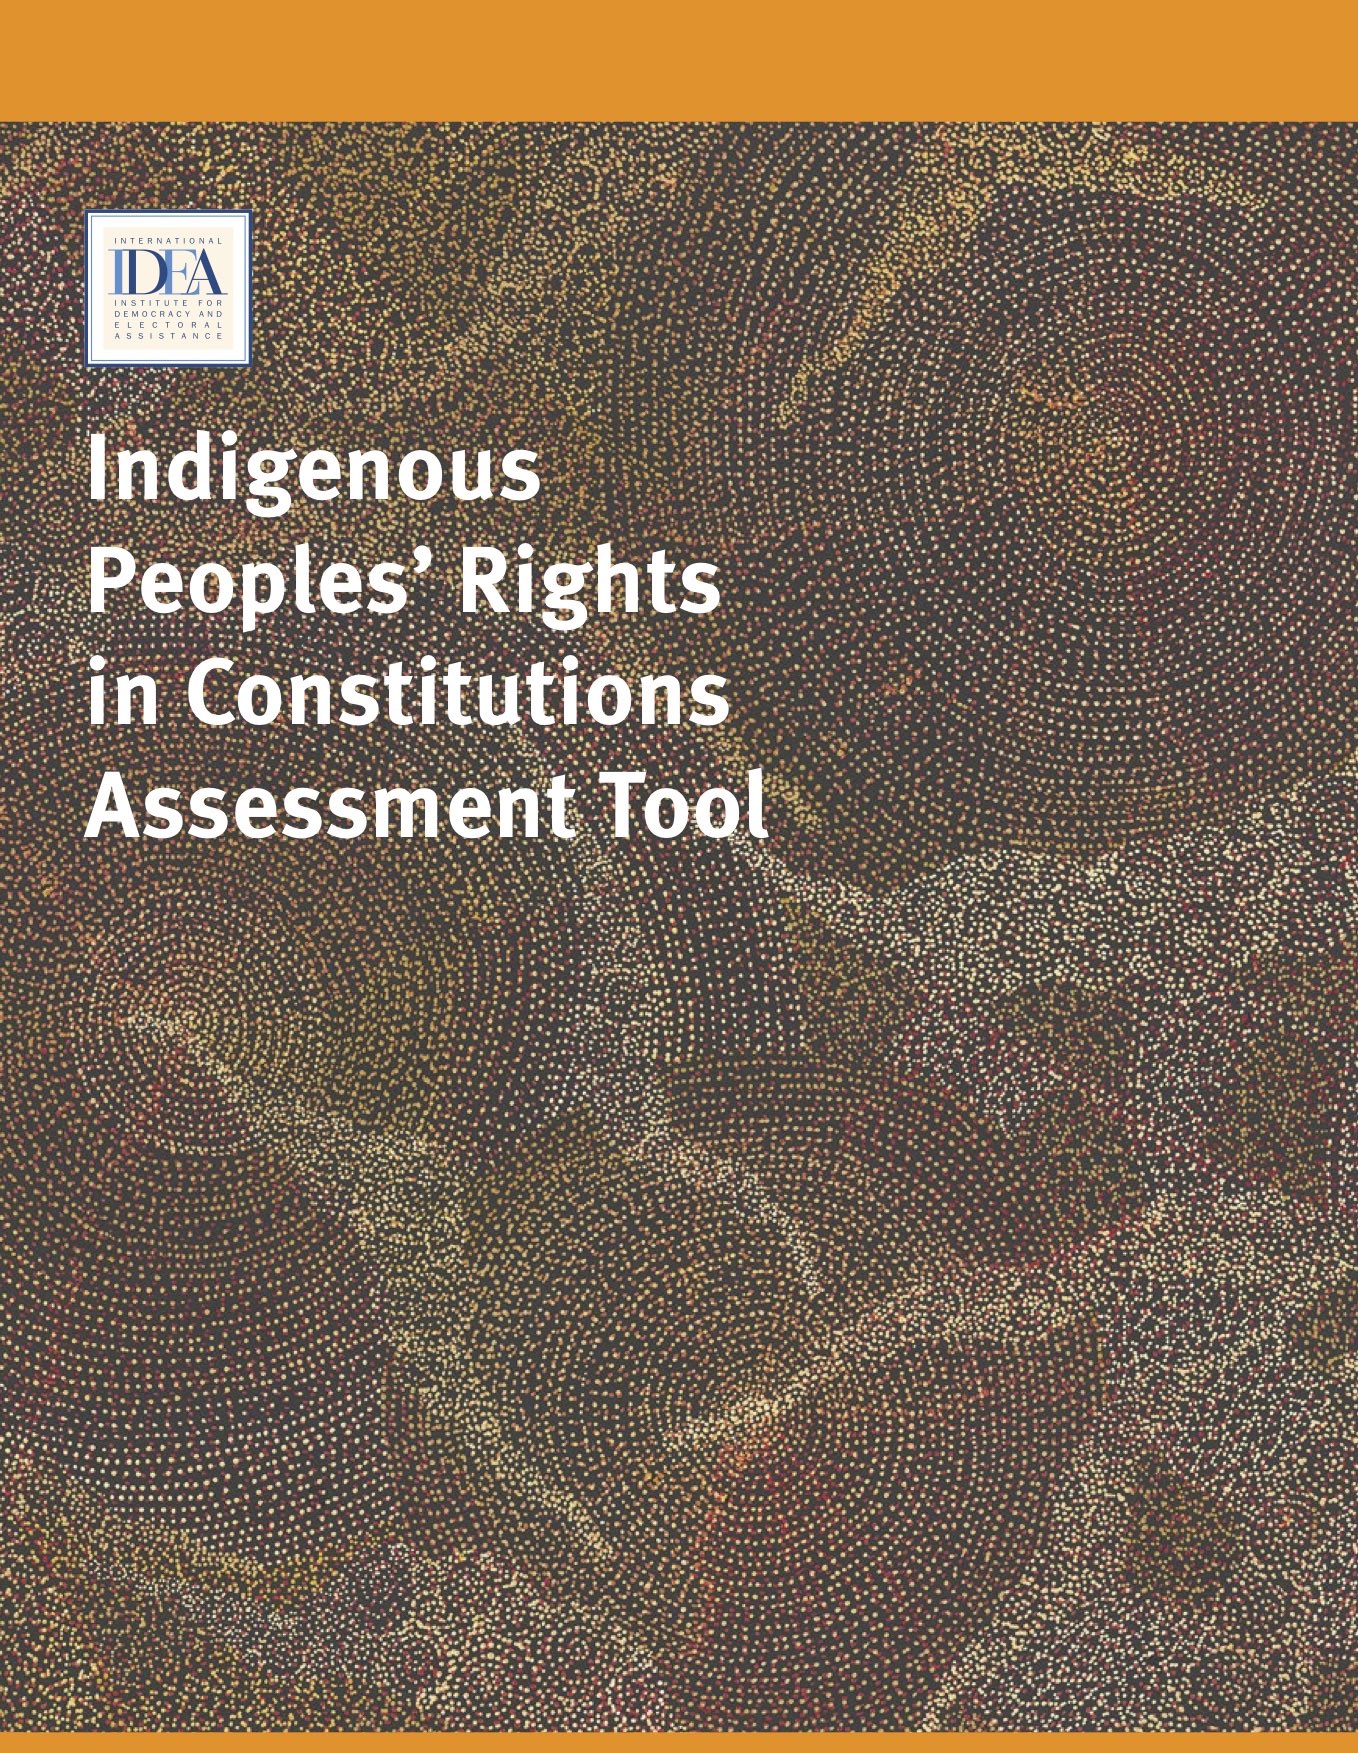 Indigenous Peoples' Rights in Constitutions Assessment Tool